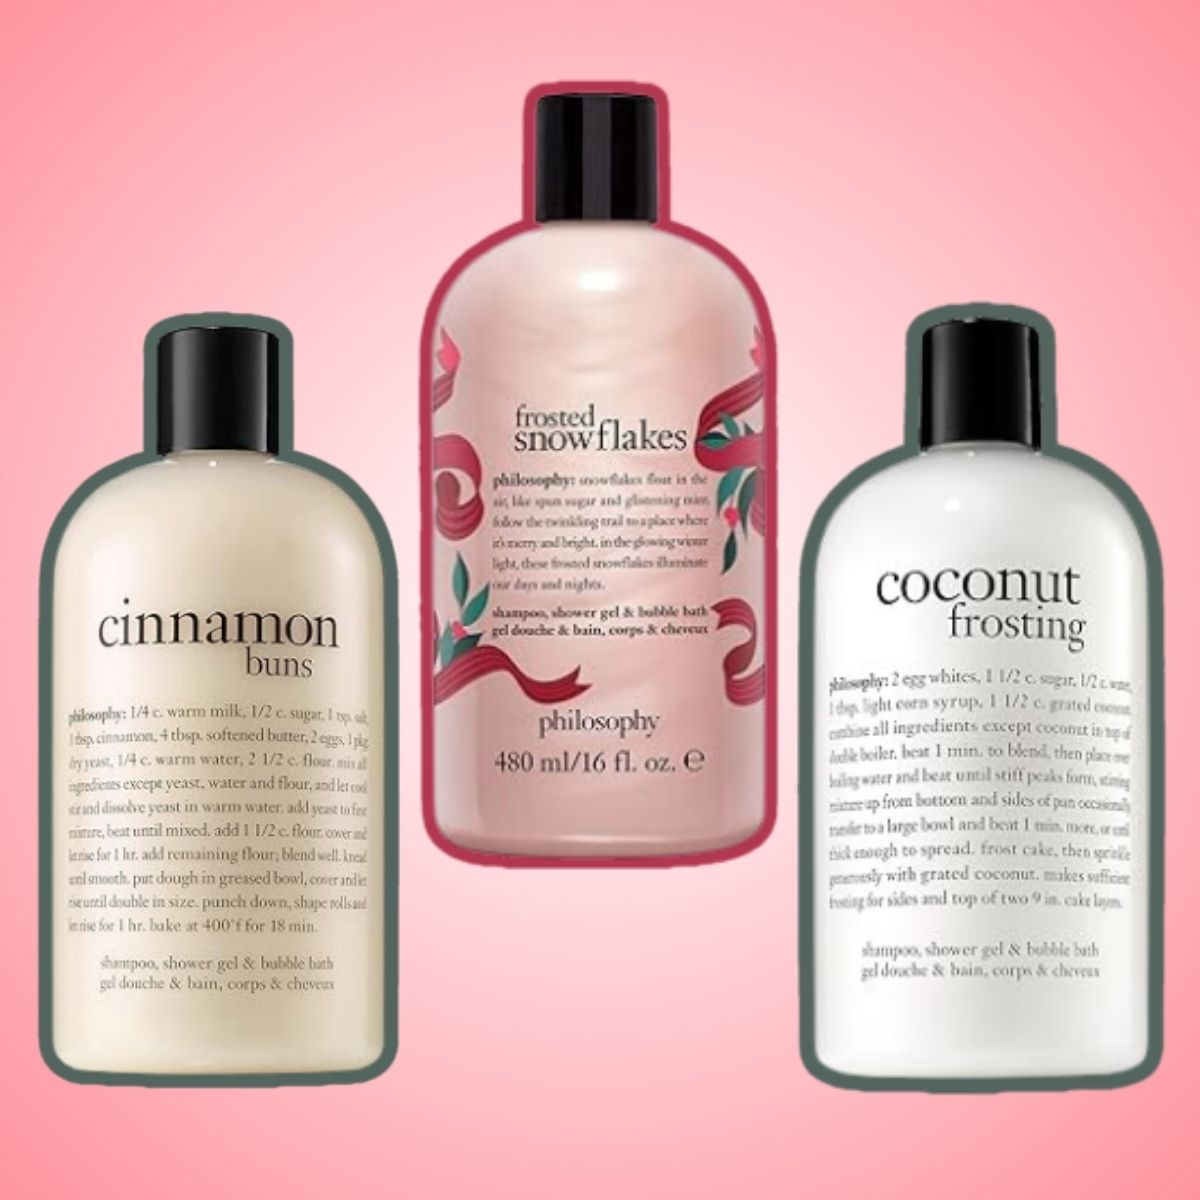 Top 5 CVS Deals, Philosophy Body Wash 1/2 Off, Cute Gifts for